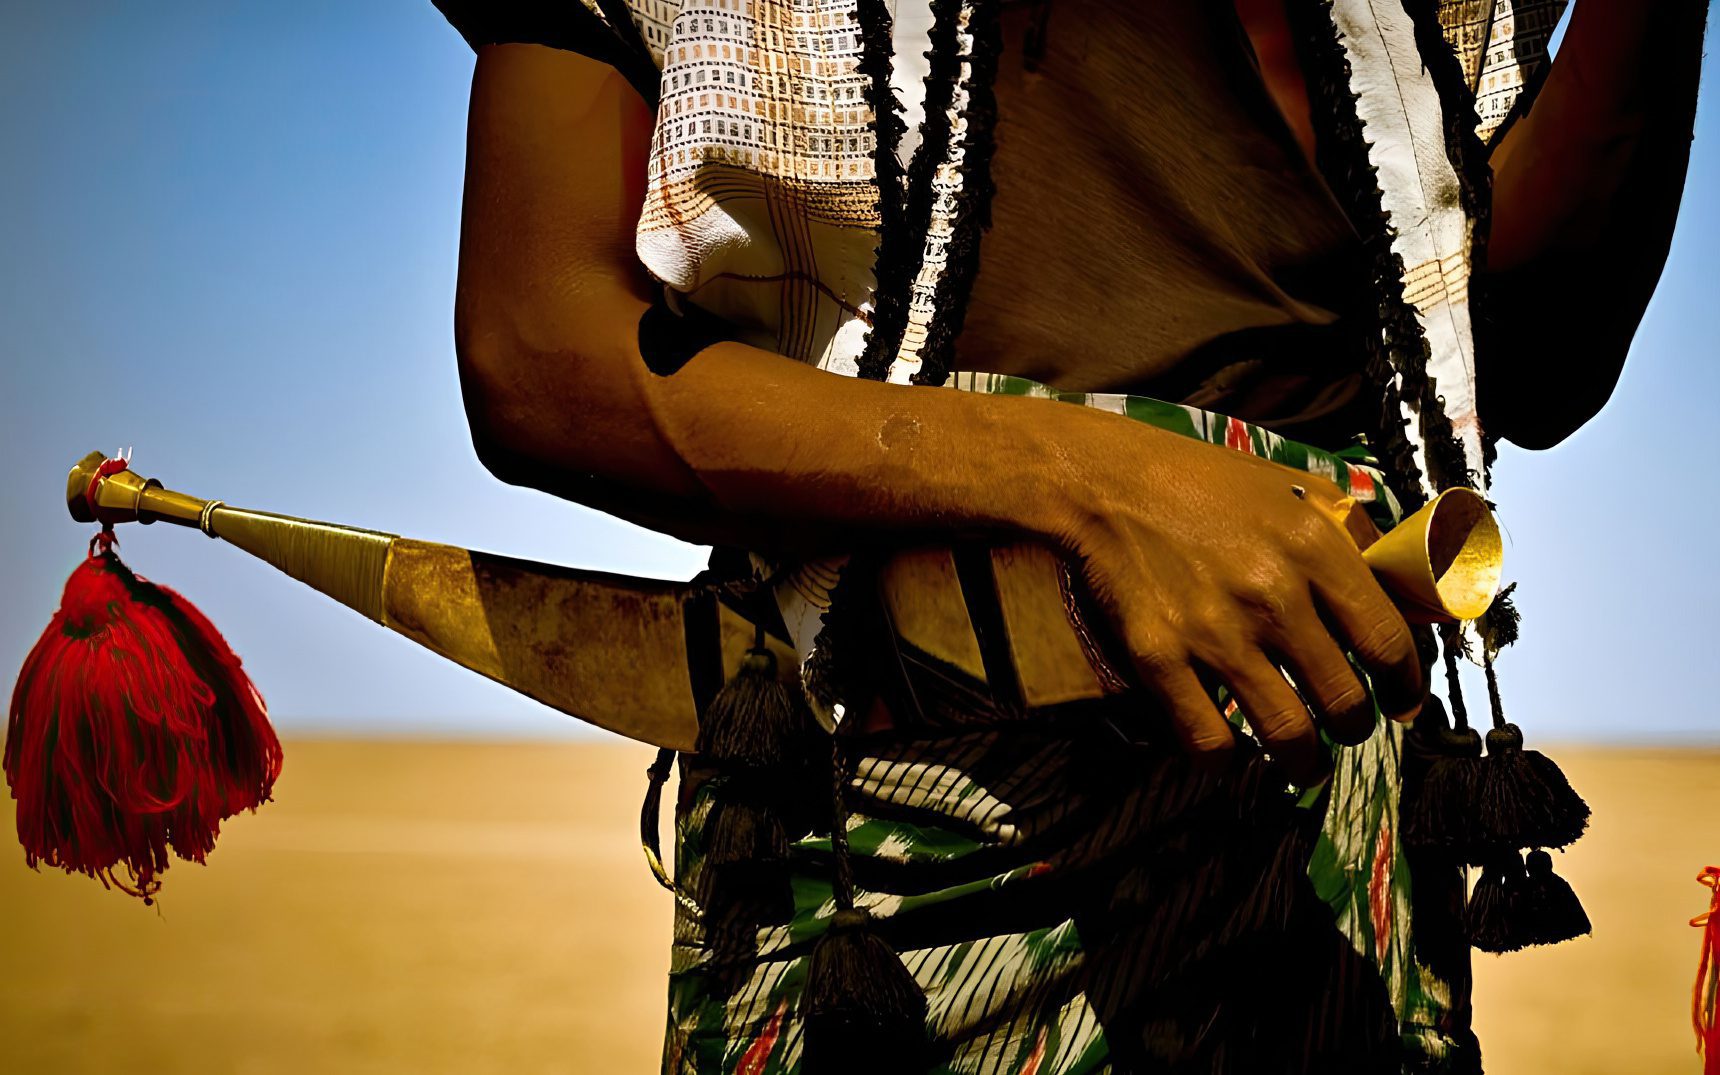 Jile Dagger: The Horn-Shaped Blade From the Horn of Africa